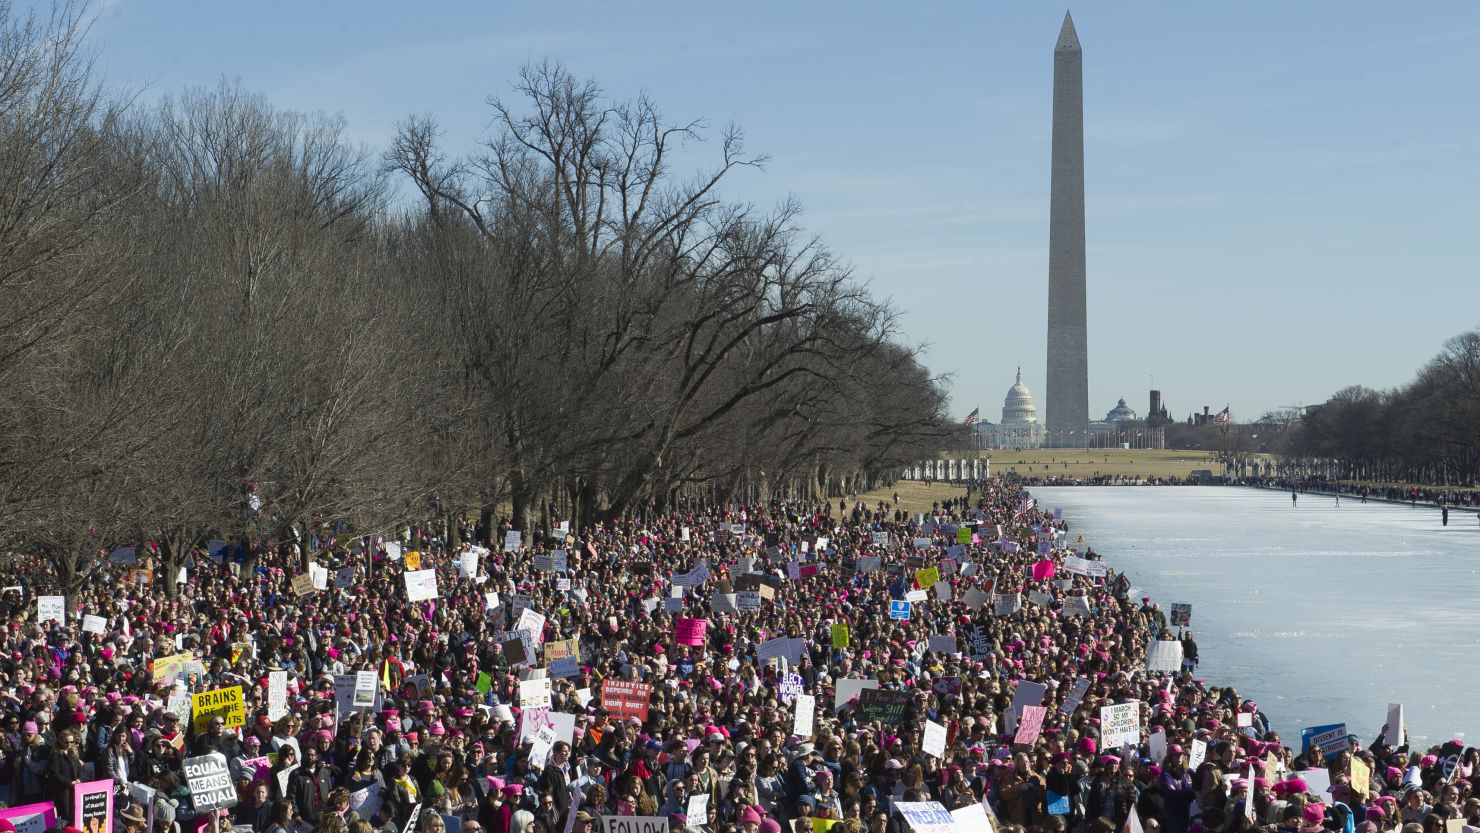 Participants in the Women's March gather near the Lincoln Memorial in Washington, Saturday, Jan. 20, 2018. On the anniversary of President Donald Trump's inauguration, people participating in rallies and marches in the U.S. and around the world Saturday denounced his views on immigration, abortion, LGBT rights, women's rights and more. (AP Photo/Cliff Owen)